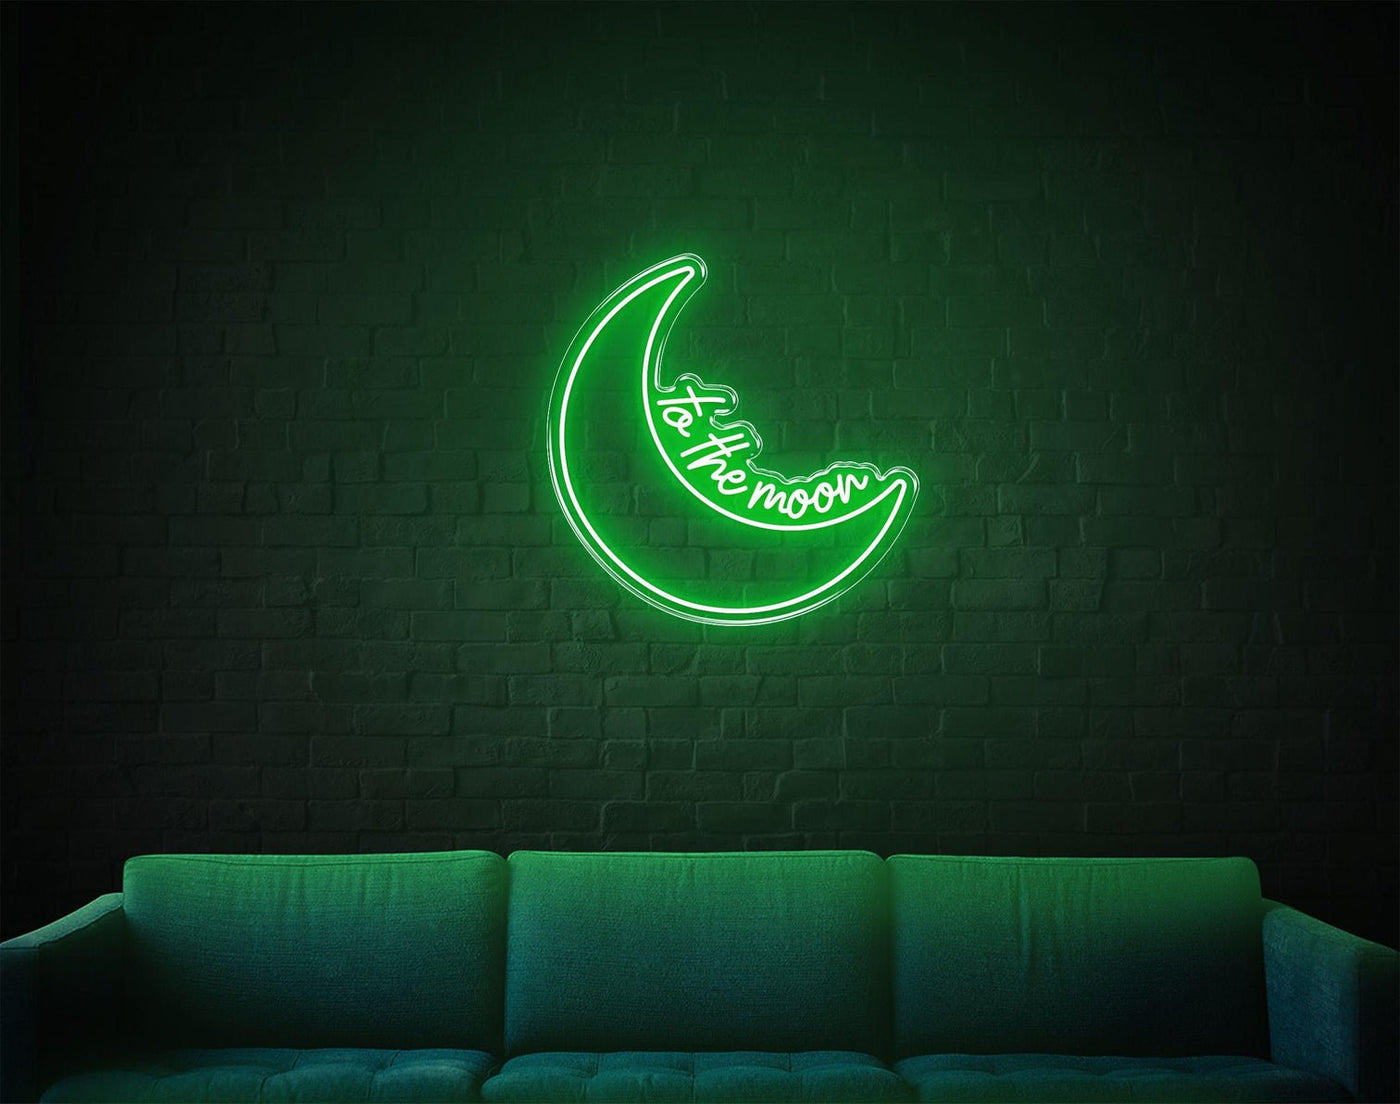 To The Moon LED neon sign - 30inch x 30inchGreen